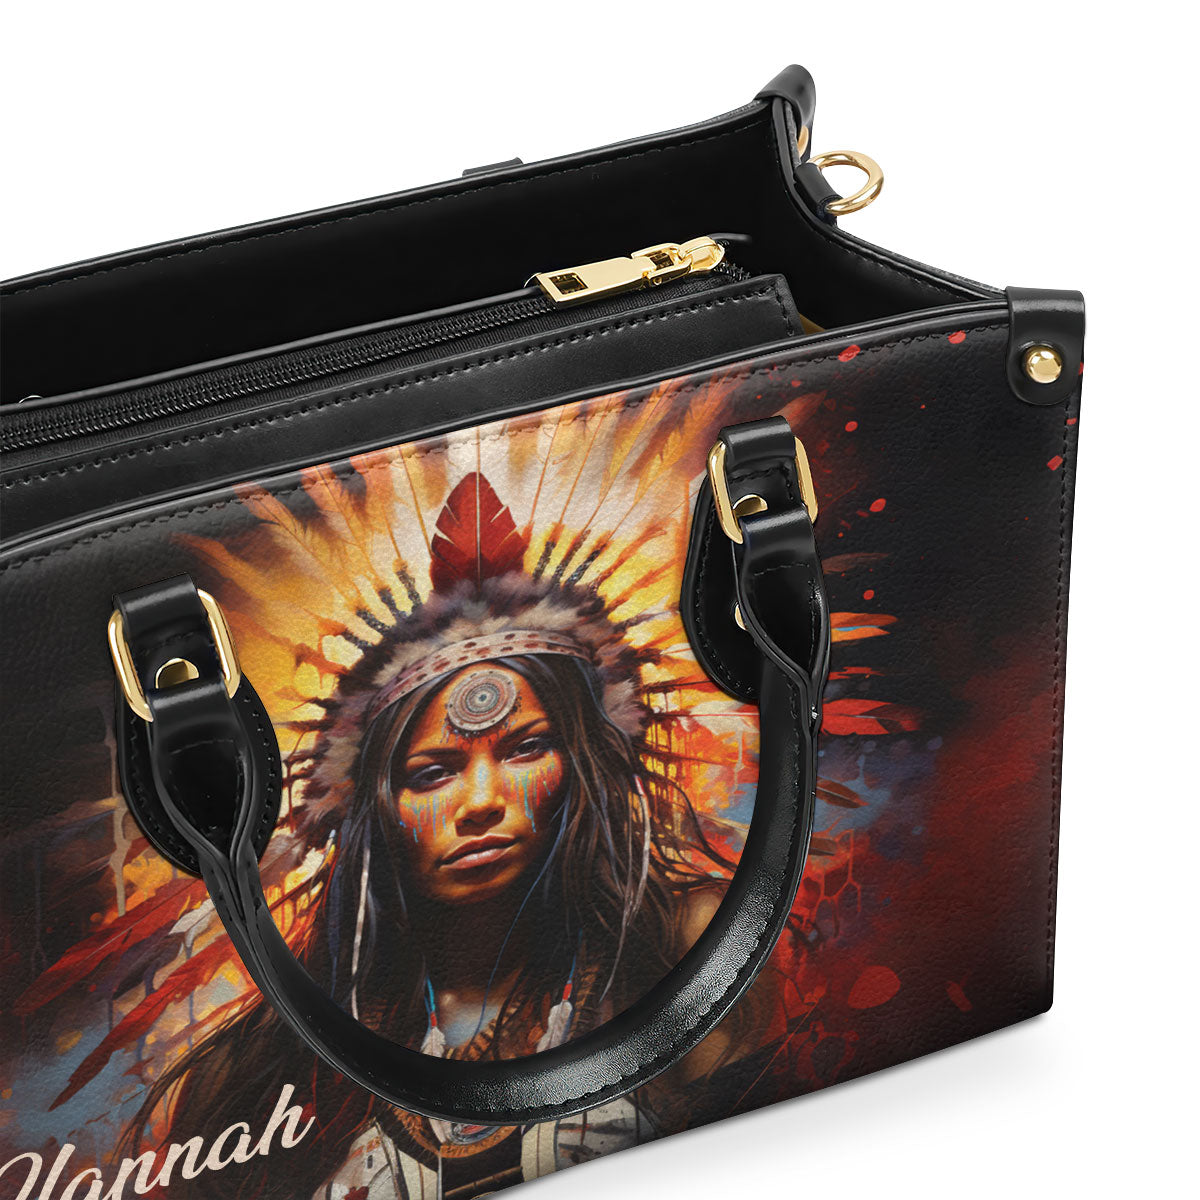 Native American - Personalized Leather Handbag MS112